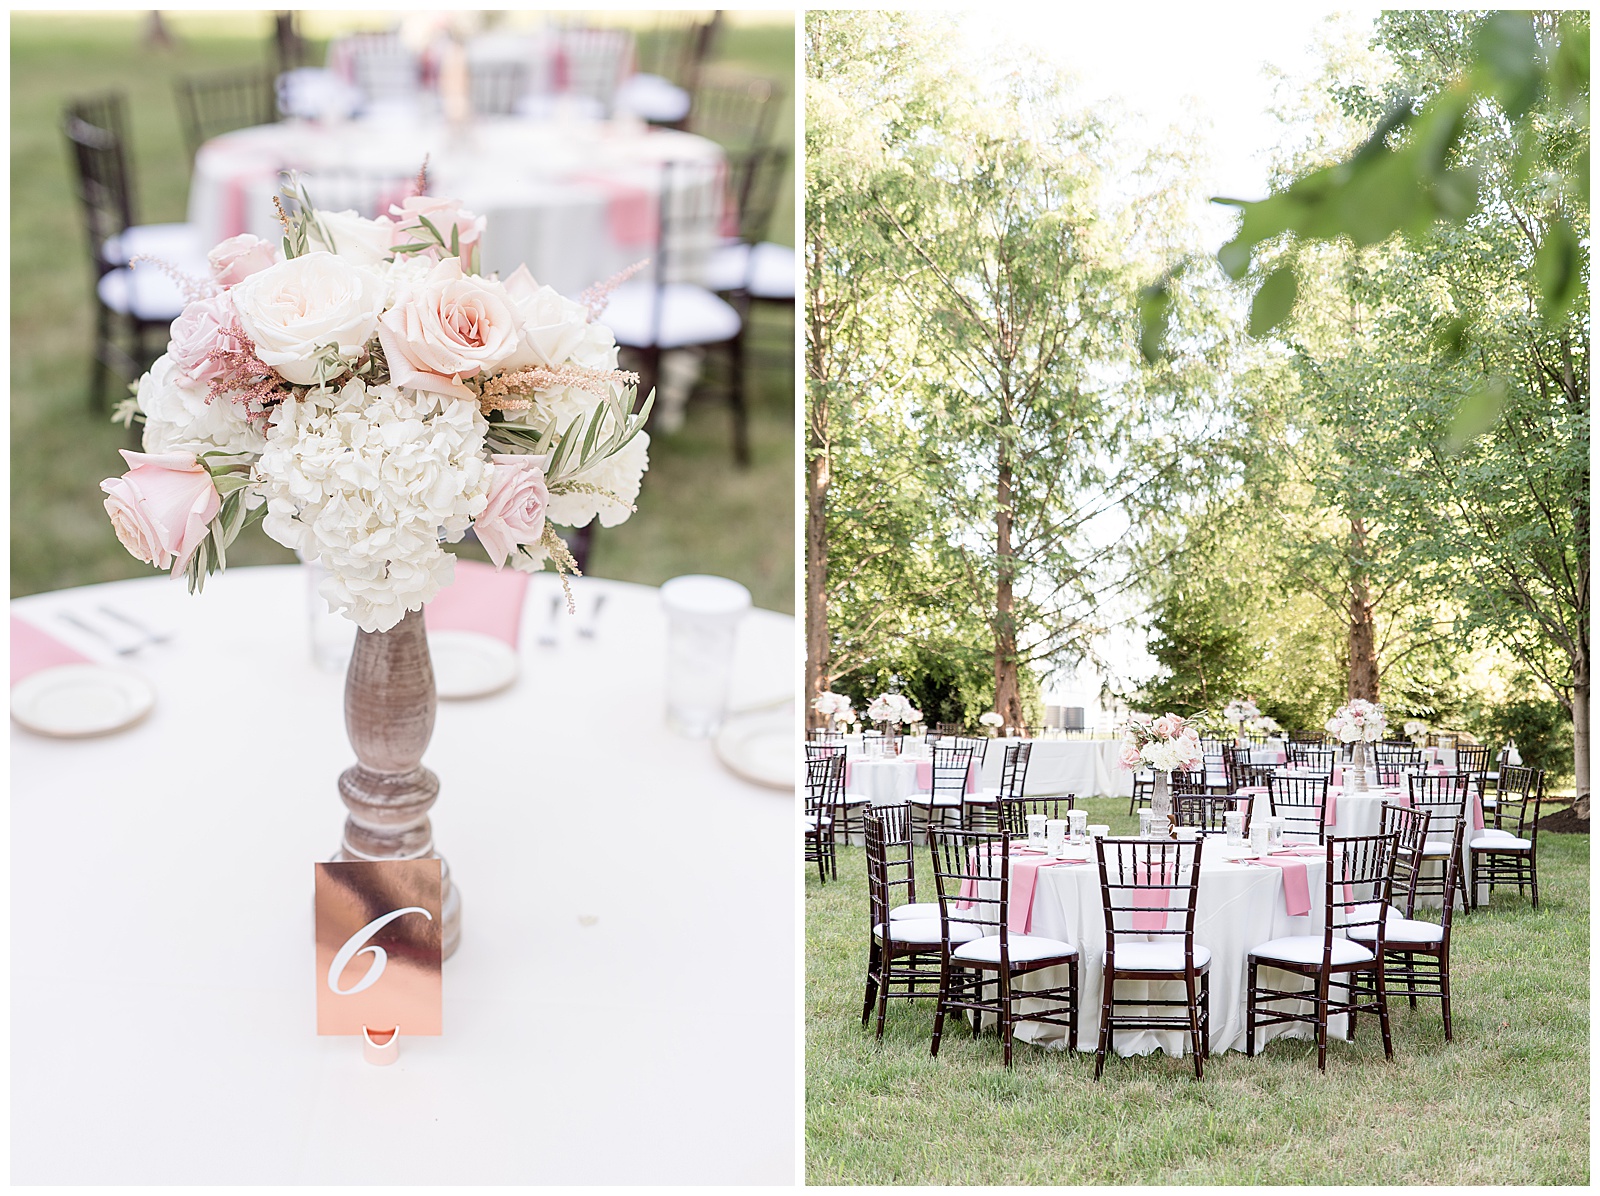 reception set up outside surrounded by trees with sun coming through the leaves, pink and white floral centerpieces and pink napkins